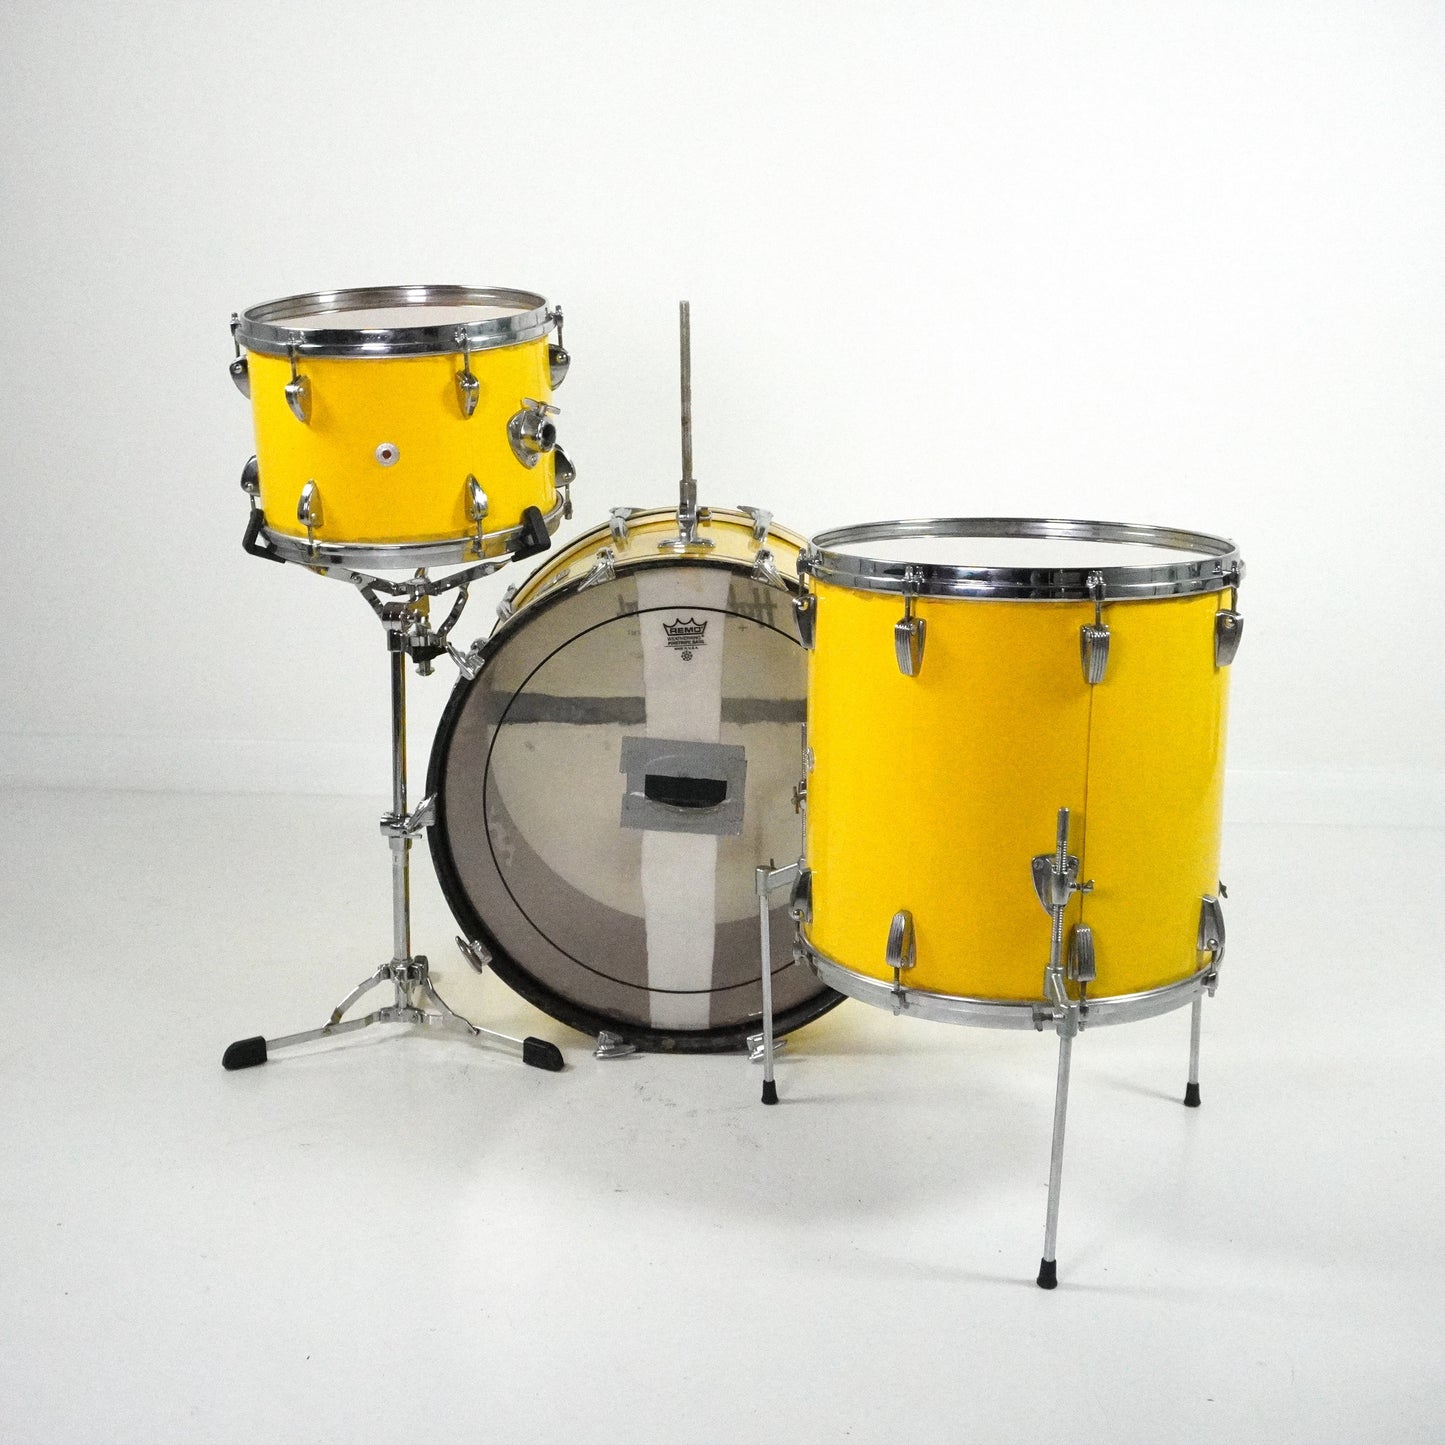 Meazzi Hollywood 3-Piece Drum Kit in Yellow 22,12,14